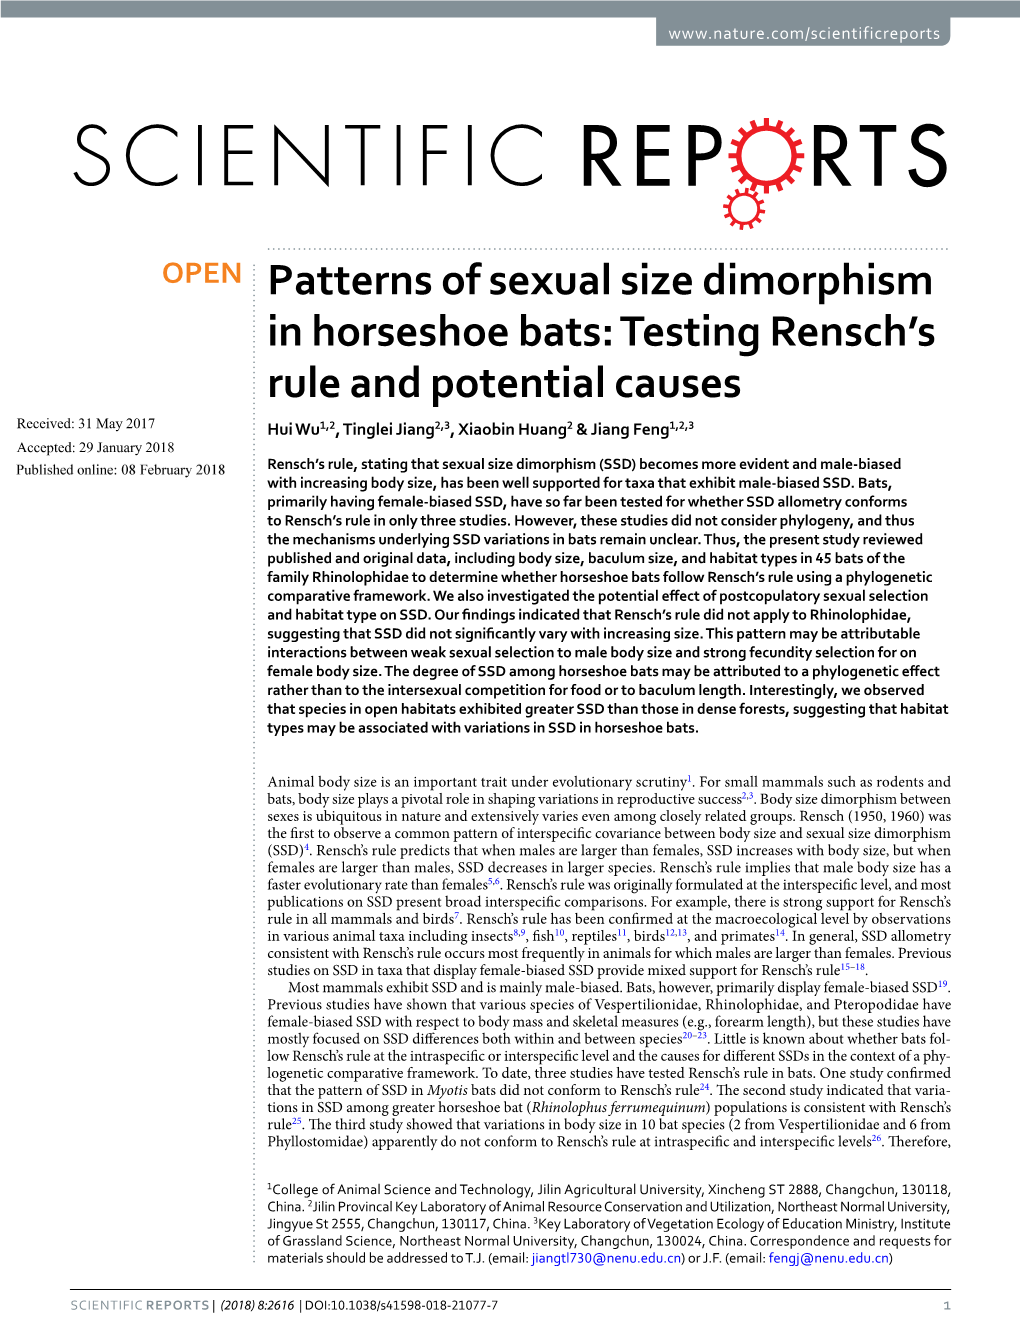 Patterns of Sexual Size Dimorphism in Horseshoe Bats: Testing Rensch's